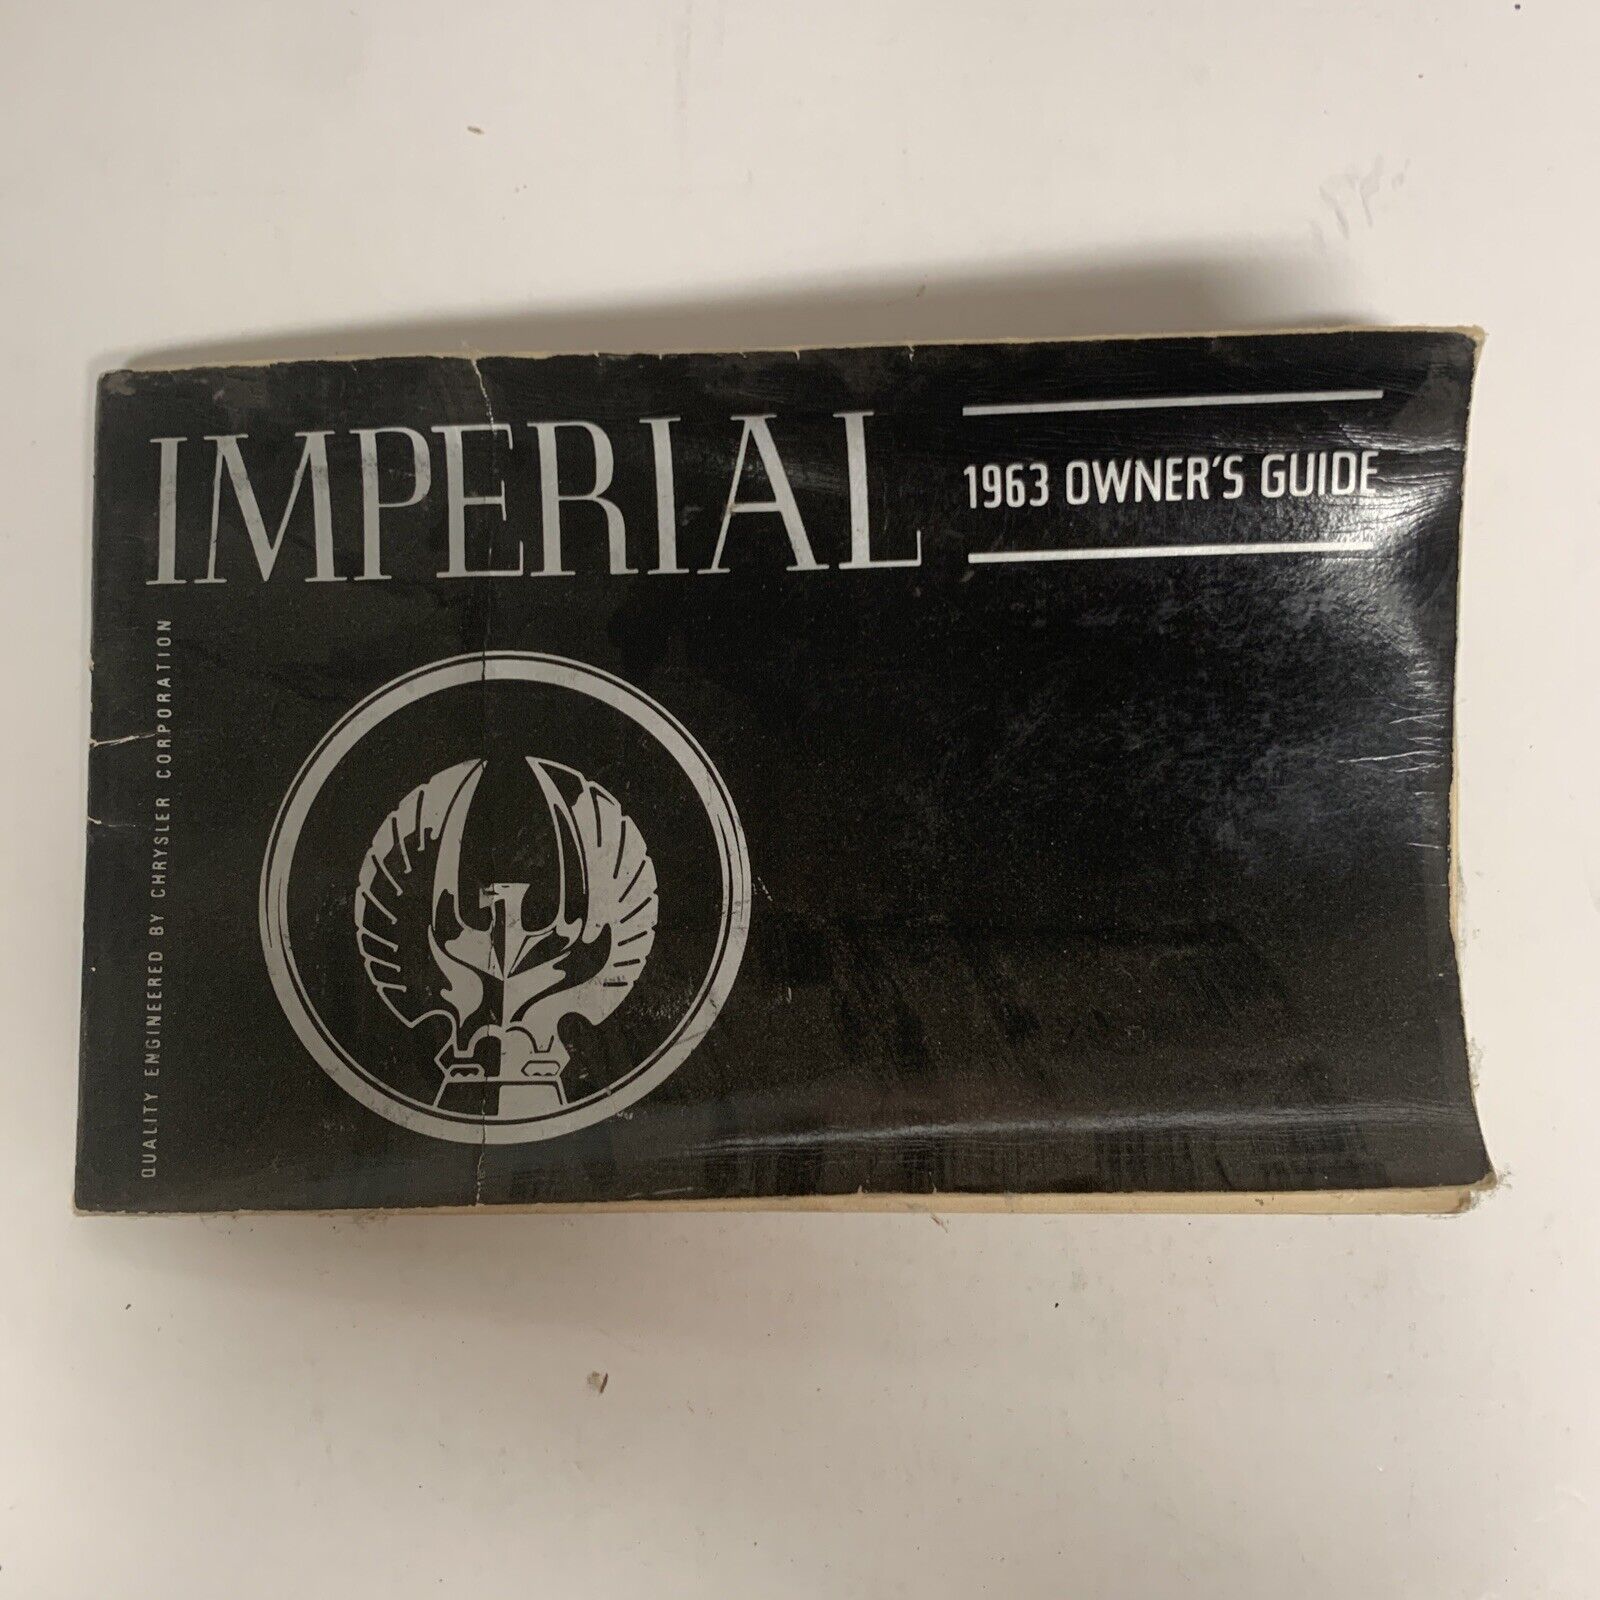 Imperial 1963 Owners Guide - Quality Engineered By Chrysler Corp 